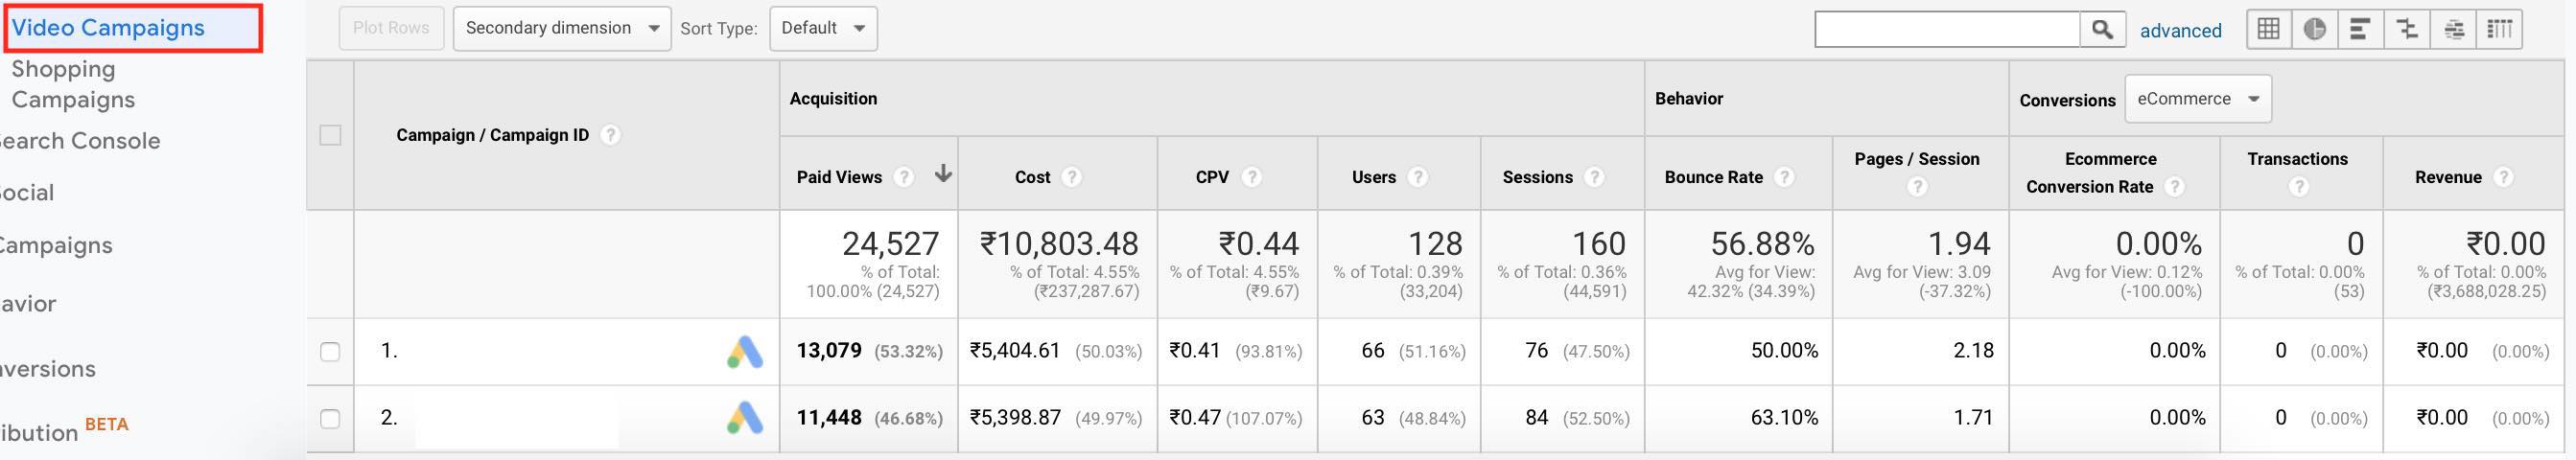 Video Campaigns Report in Google Analytics